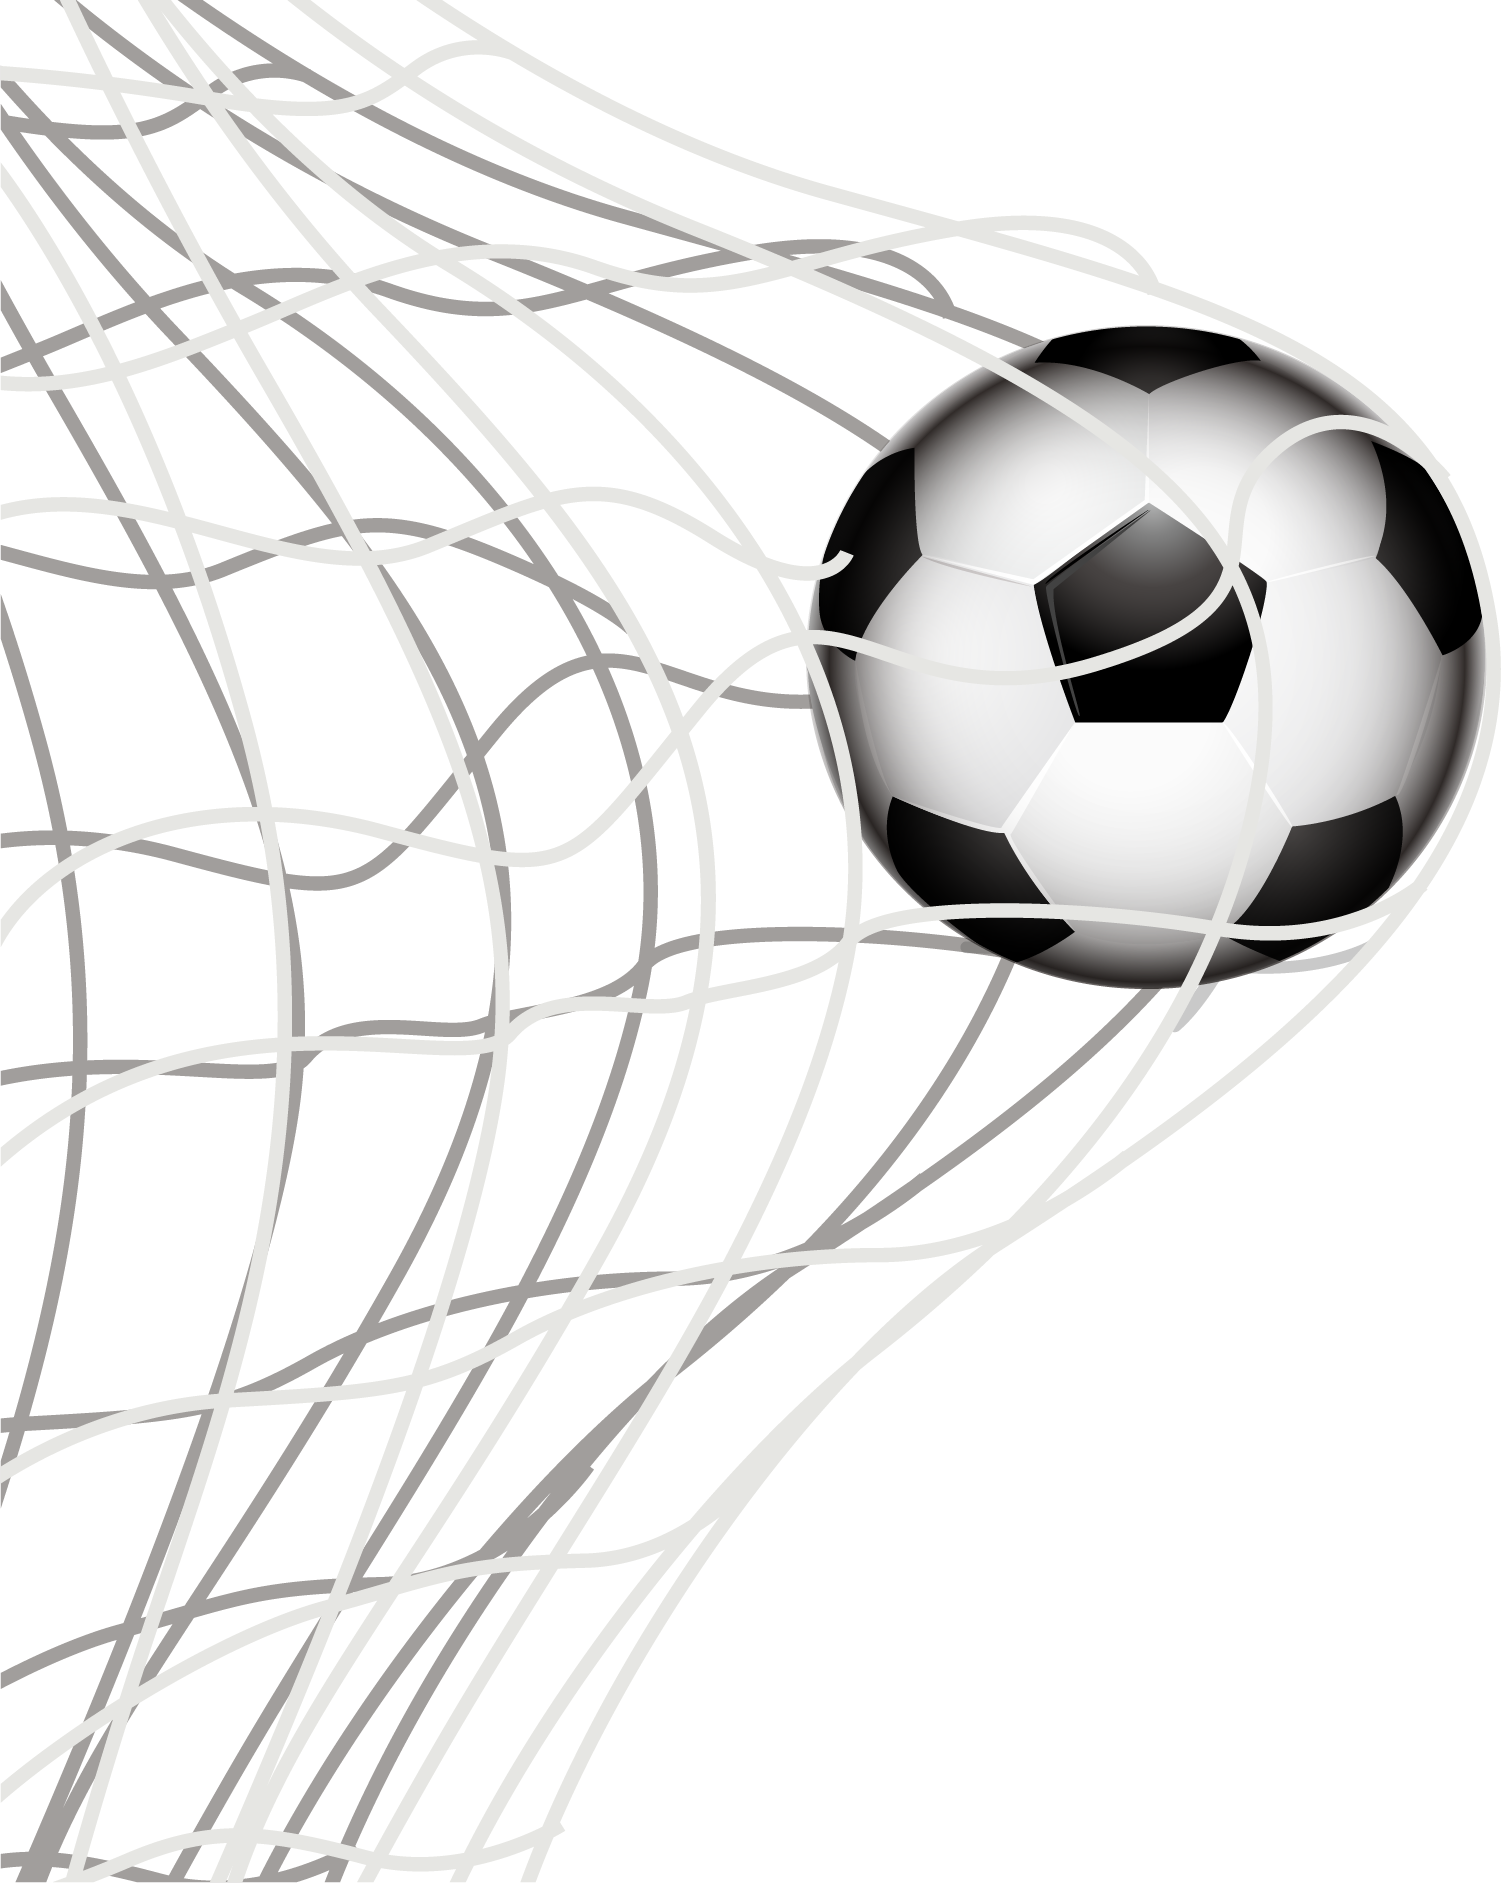 Football Goal Net PNG Pic Background